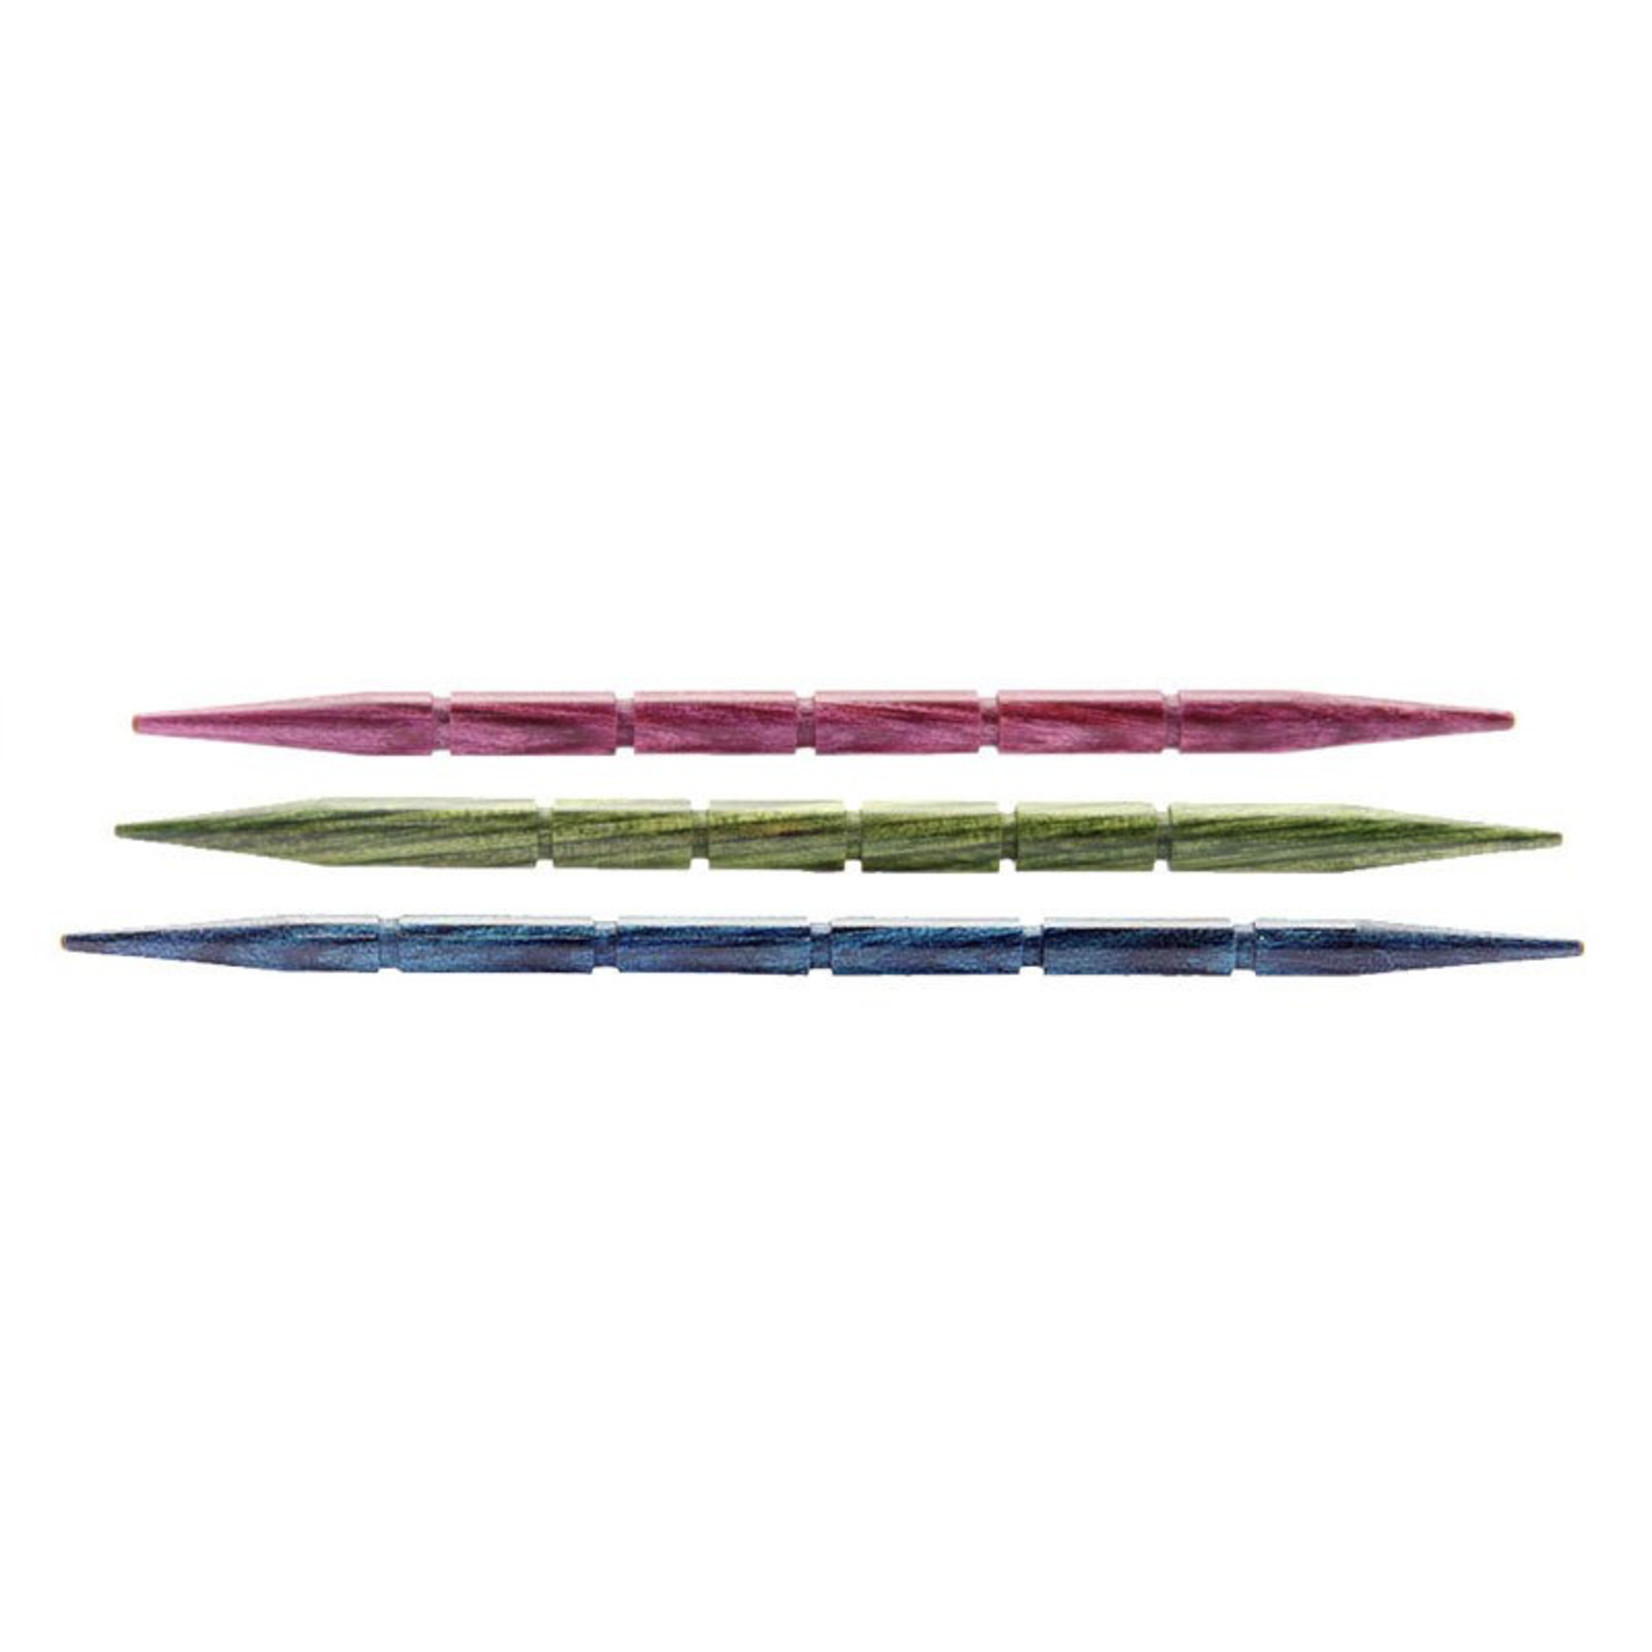 Knitter's Pride Dreamz Cable Needles